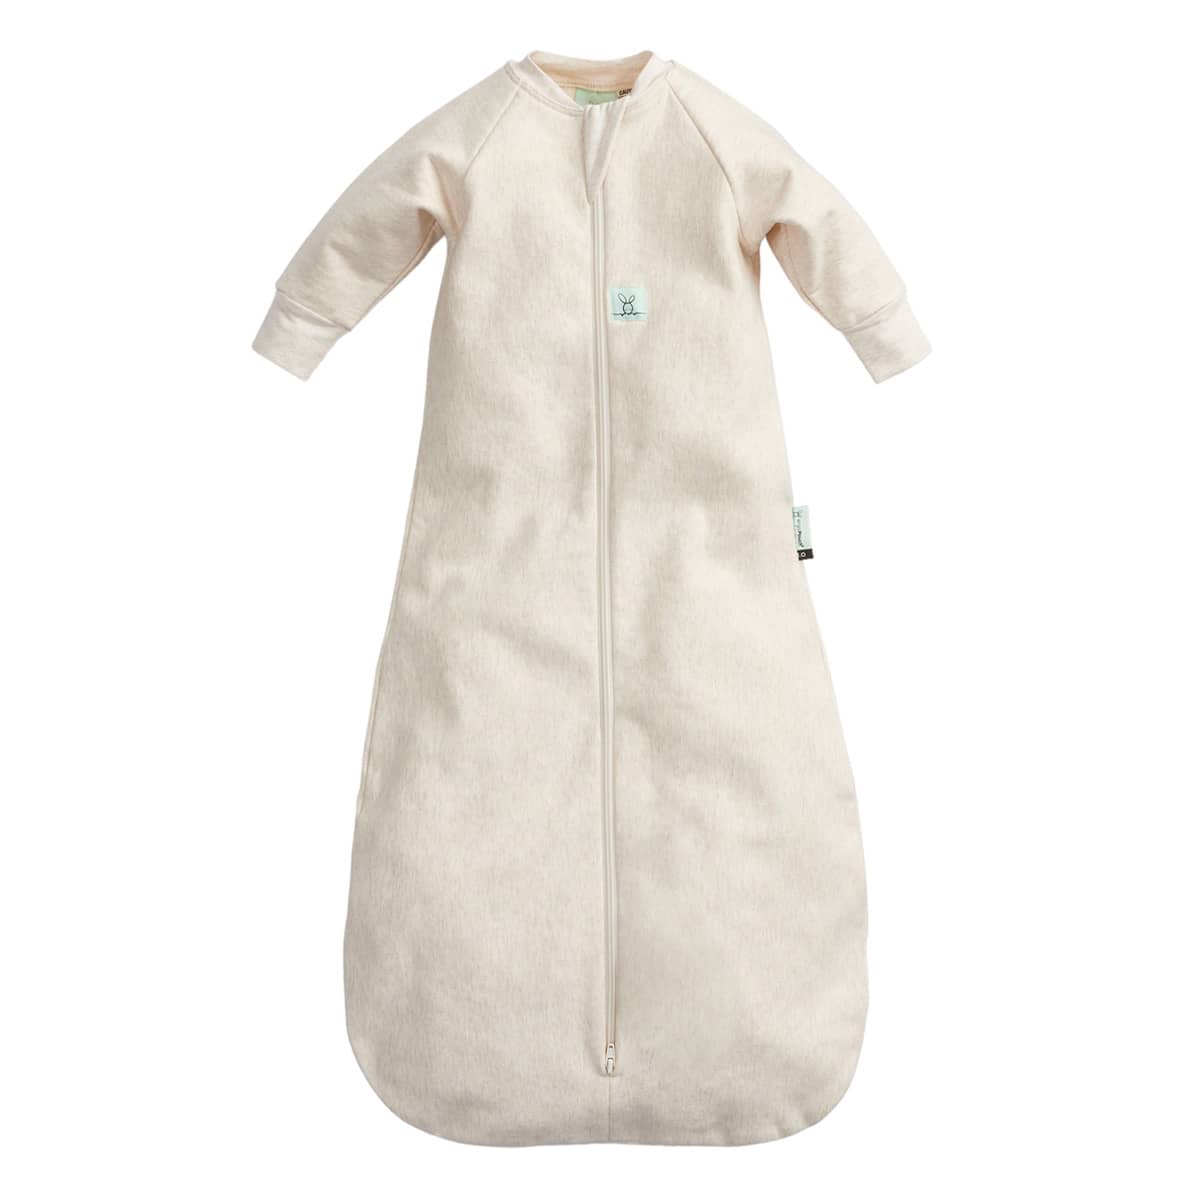 ergoPouch Jersey Sleeping Bag 1.0 TOG with Sleeves - Oatmeal Marle - 8 to 24 Months